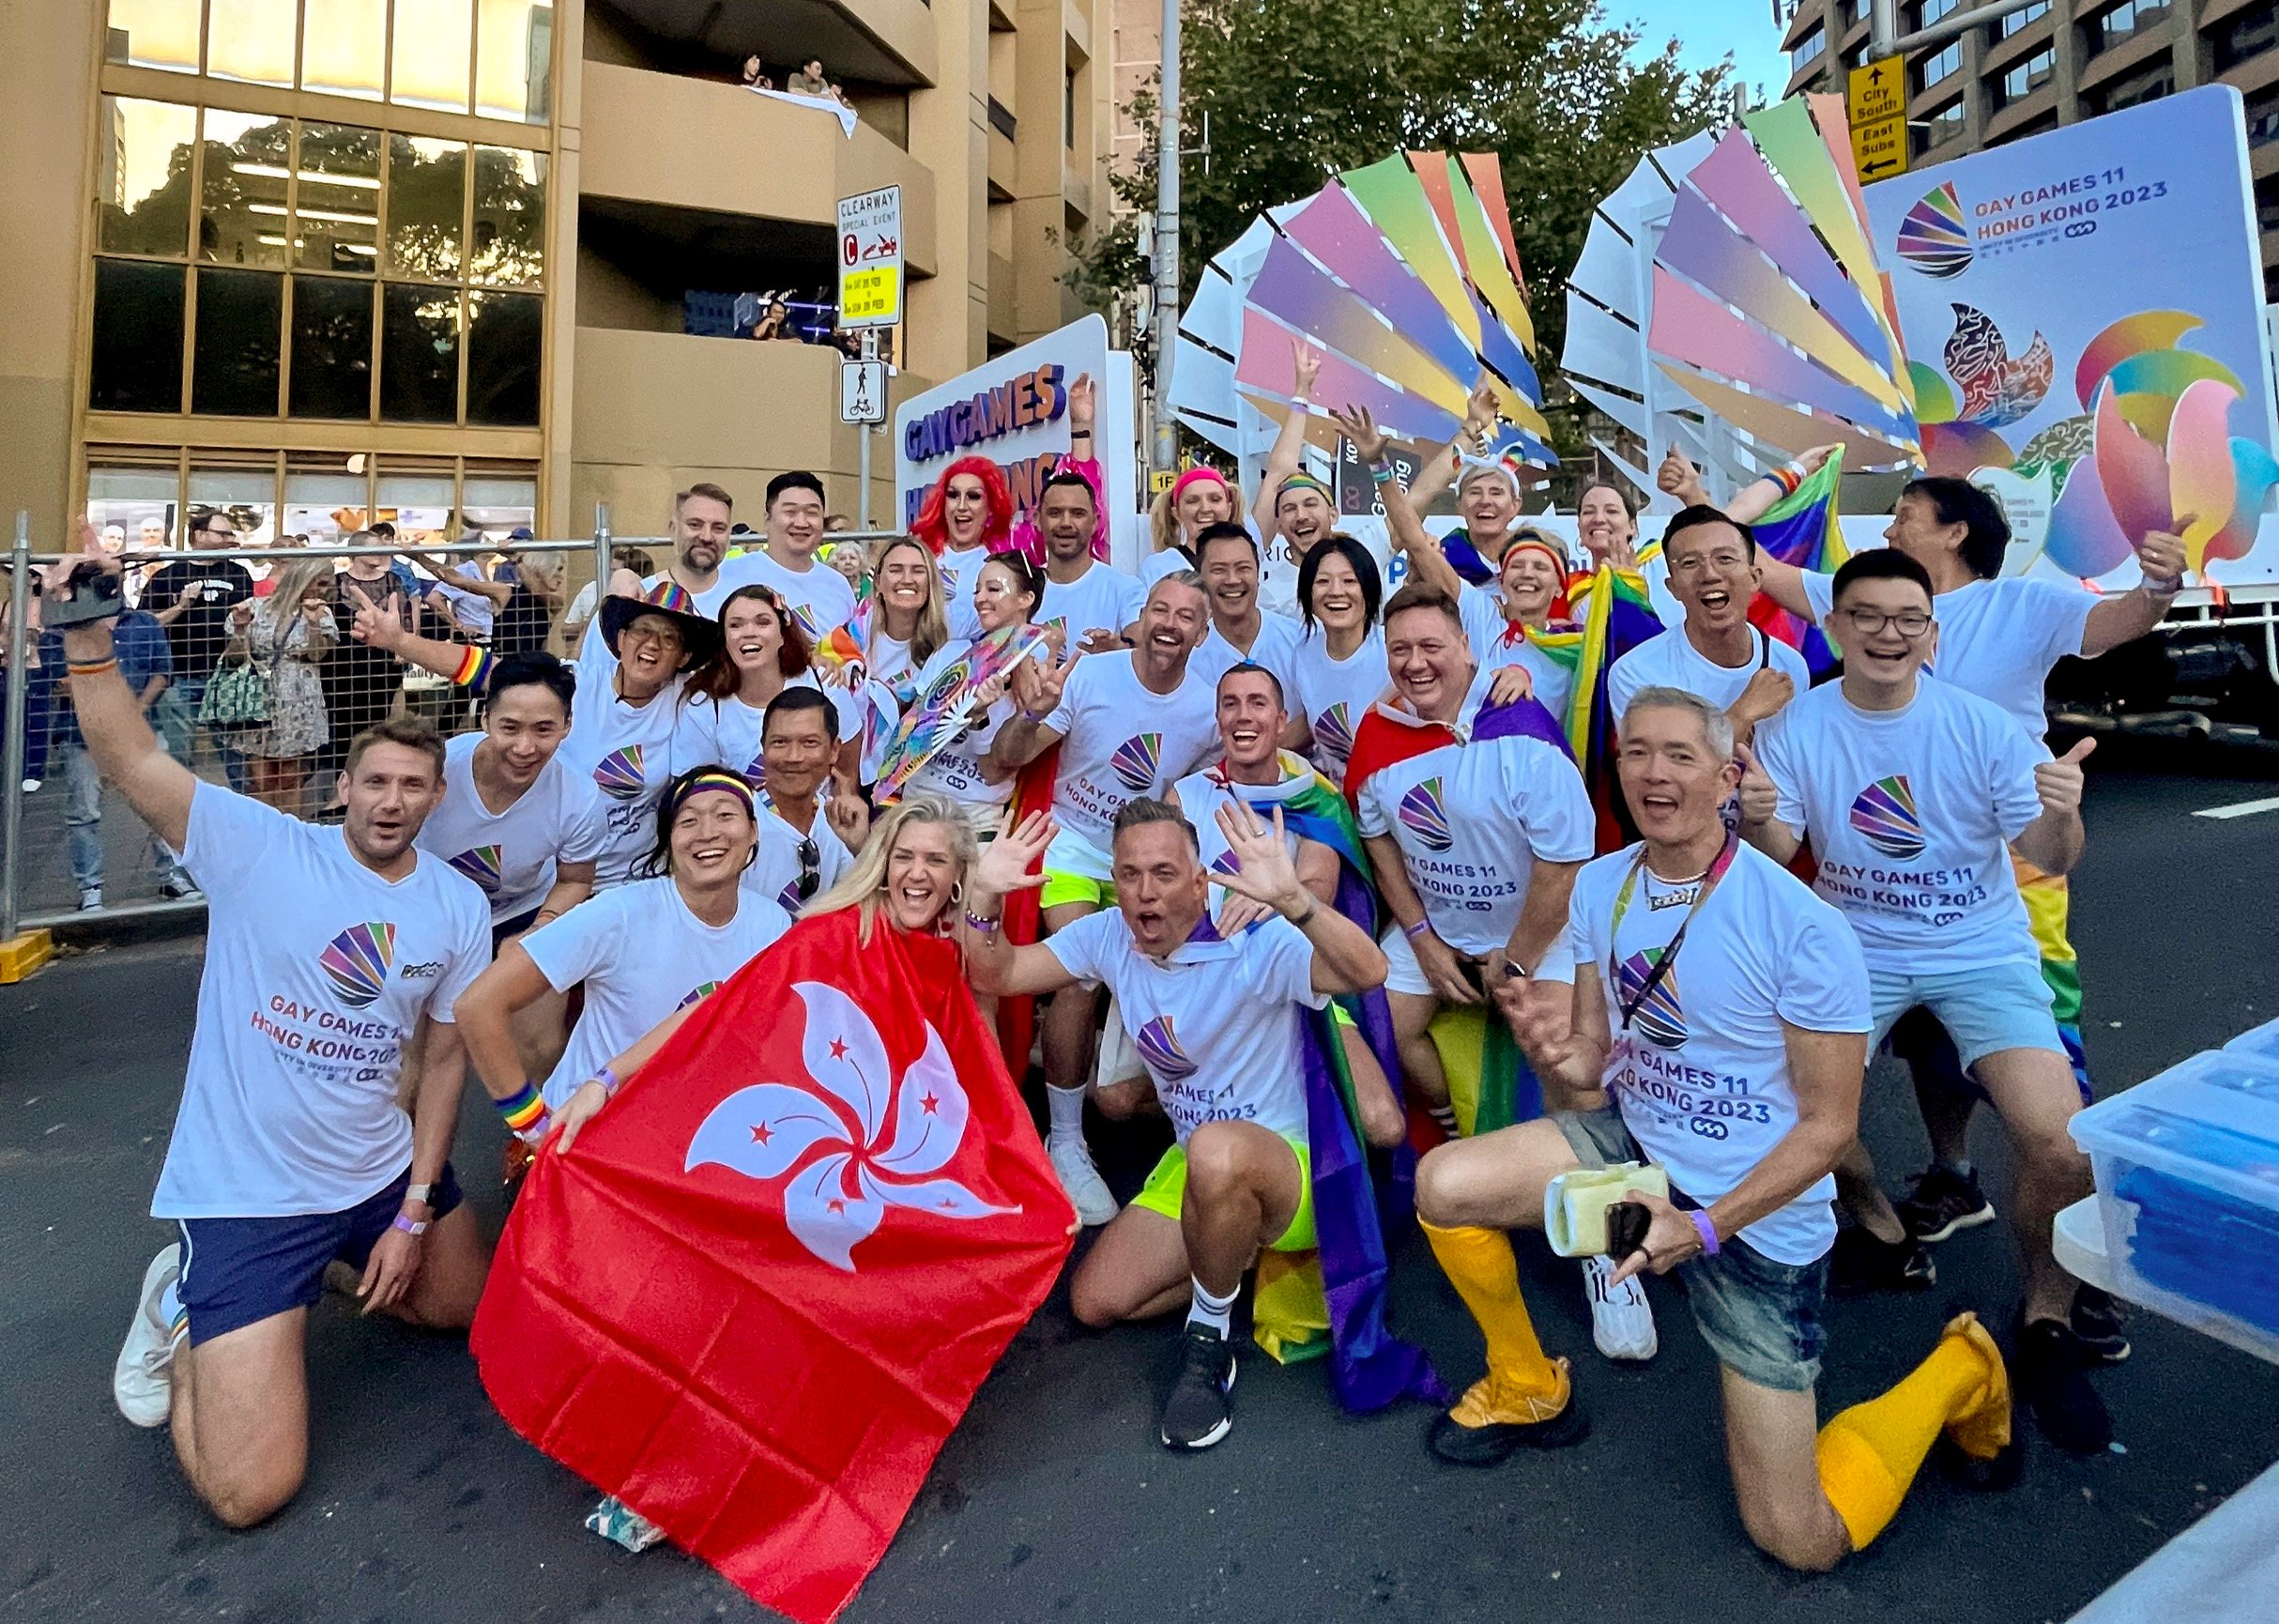 The Gay Games Hong Kong organisers celebrate in Sydney as part of the Mardi Gras Parade for World Pride on February 26. Photo: Handout